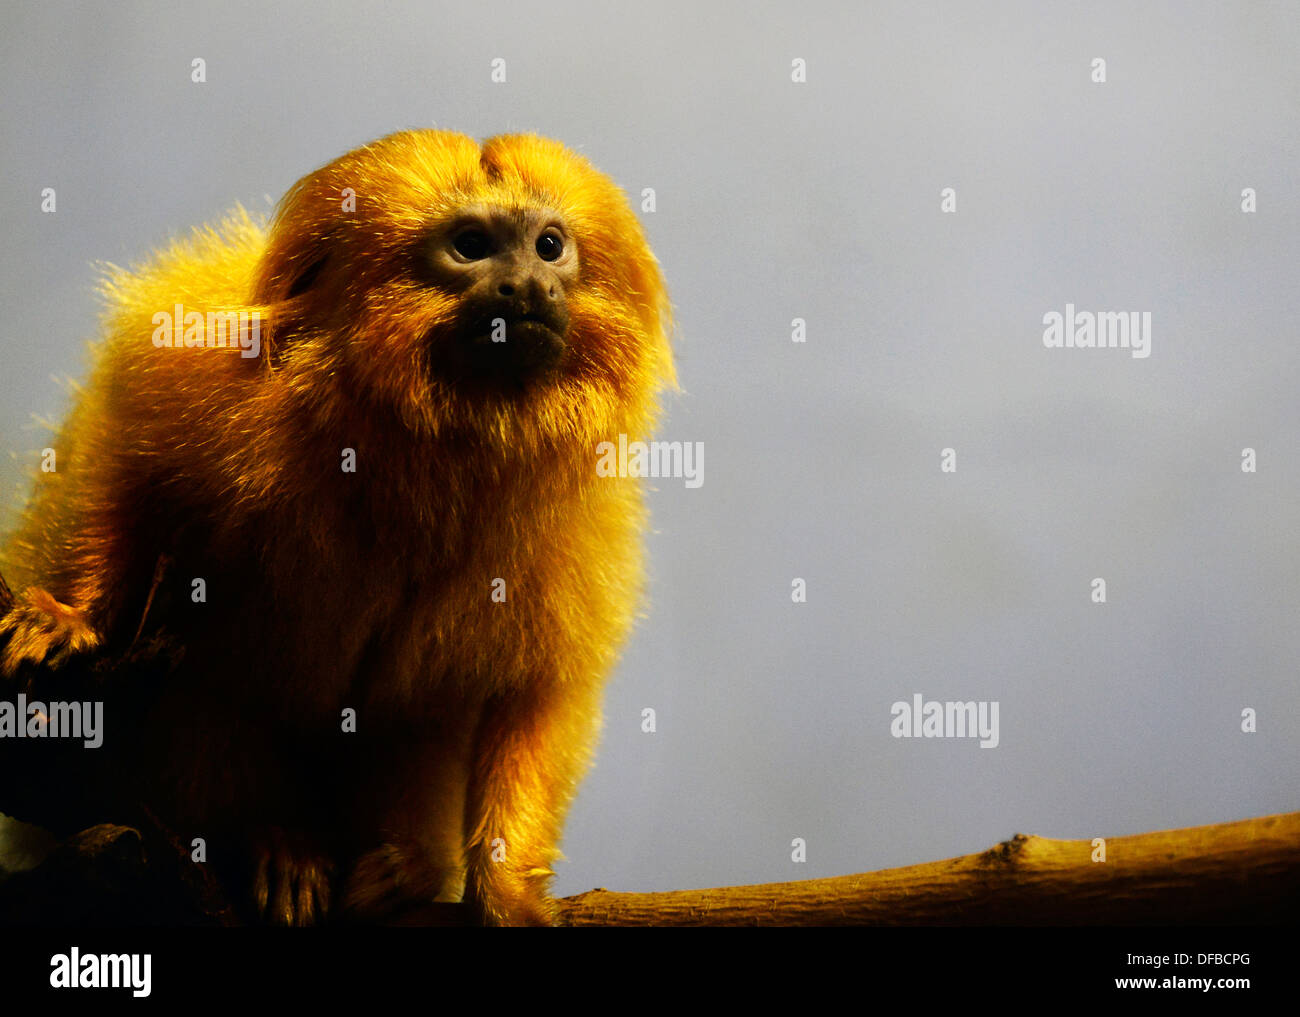 A close view of the golden lion Tamarin. Stock Photo